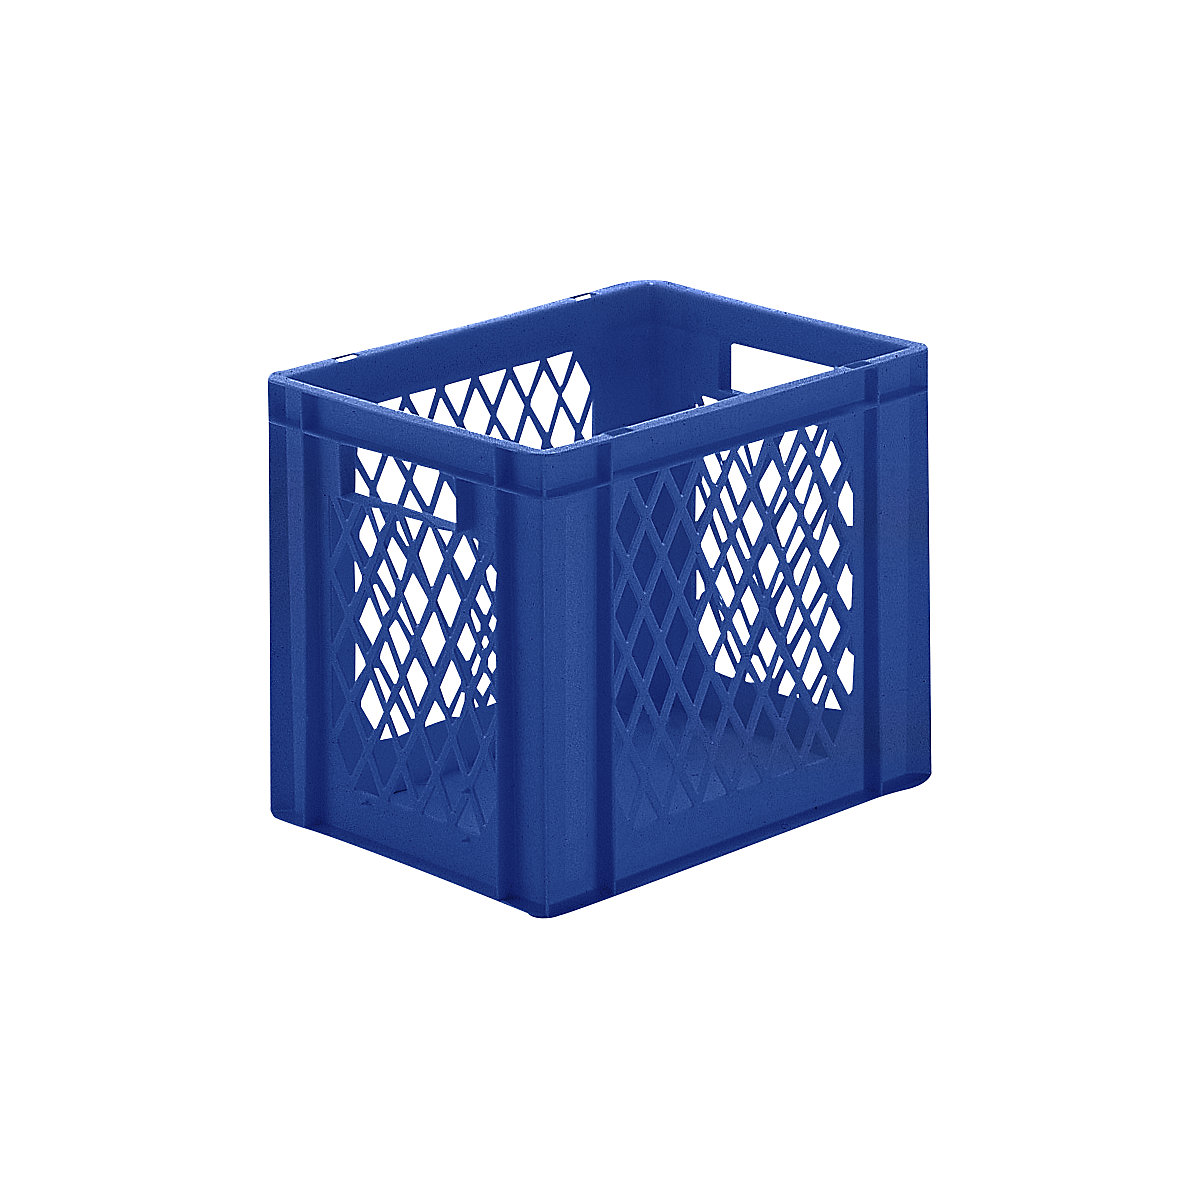 Euro stacking container, perforated walls, closed base, LxWxH 400 x 300 x 320 mm, blue, pack of 5-7